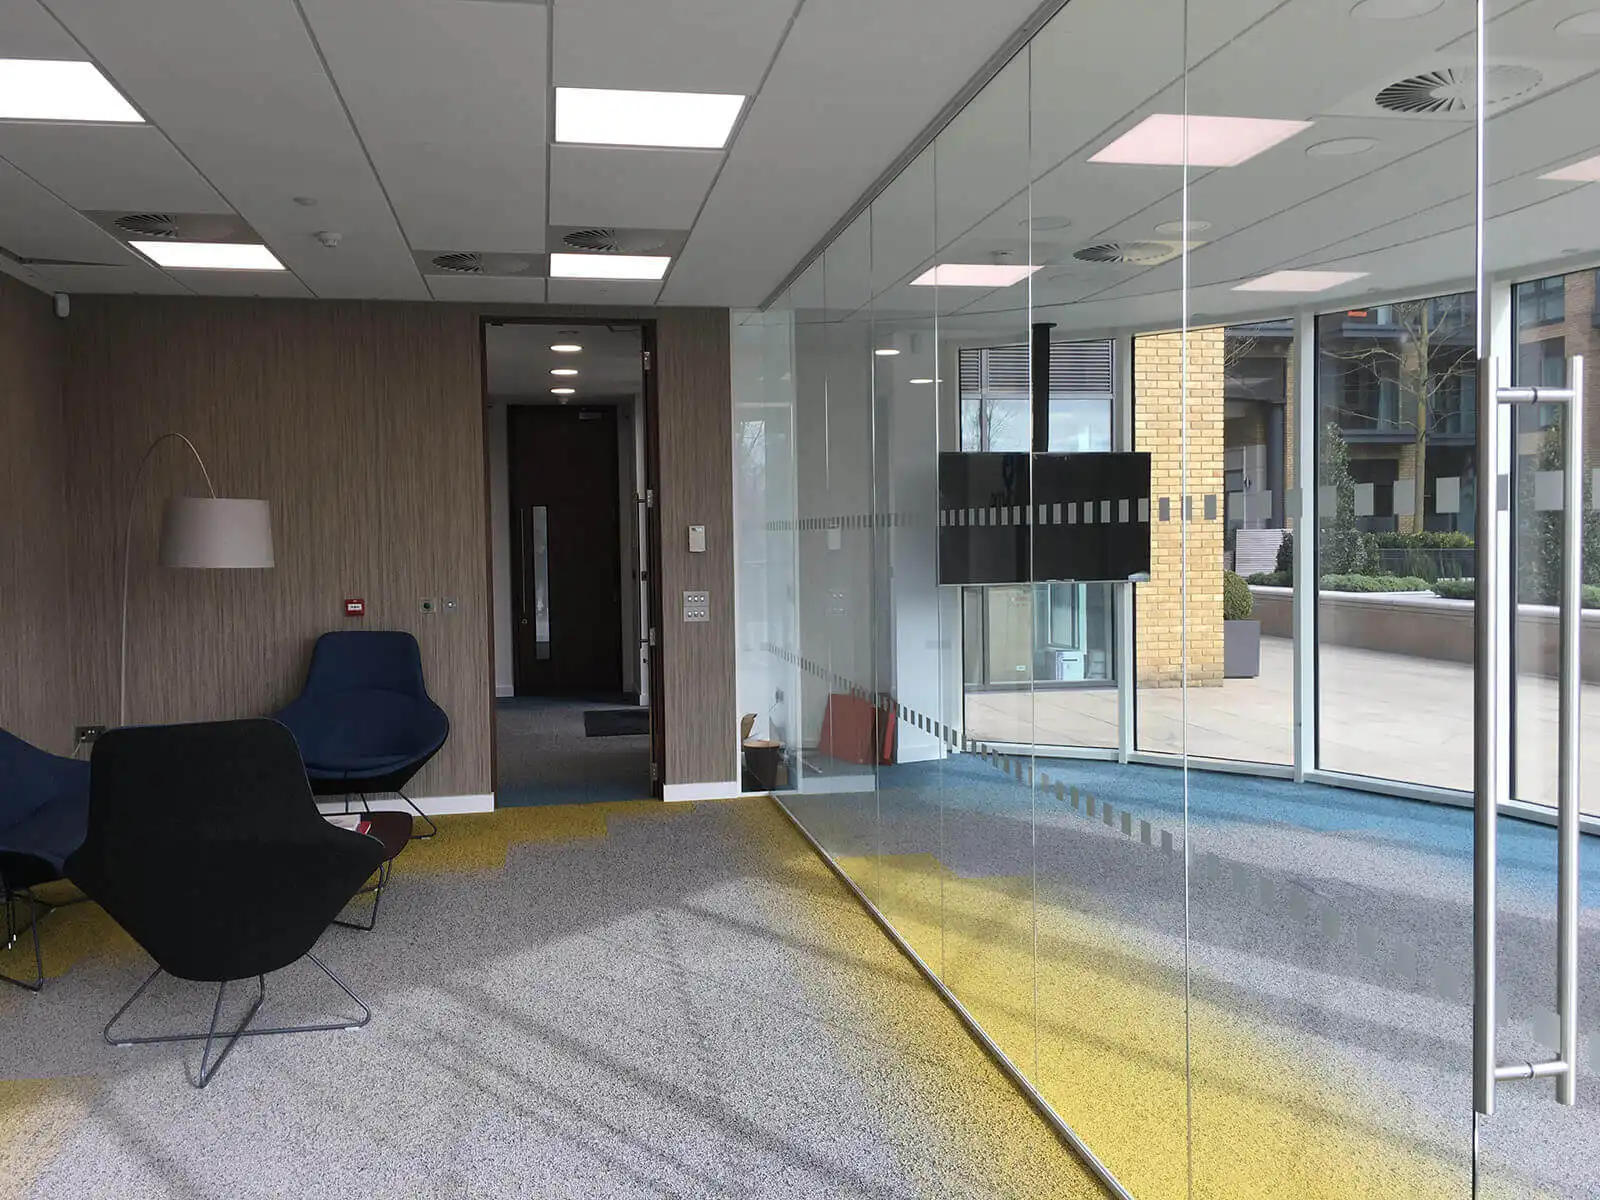 Office space with brakout space and structural glass partition